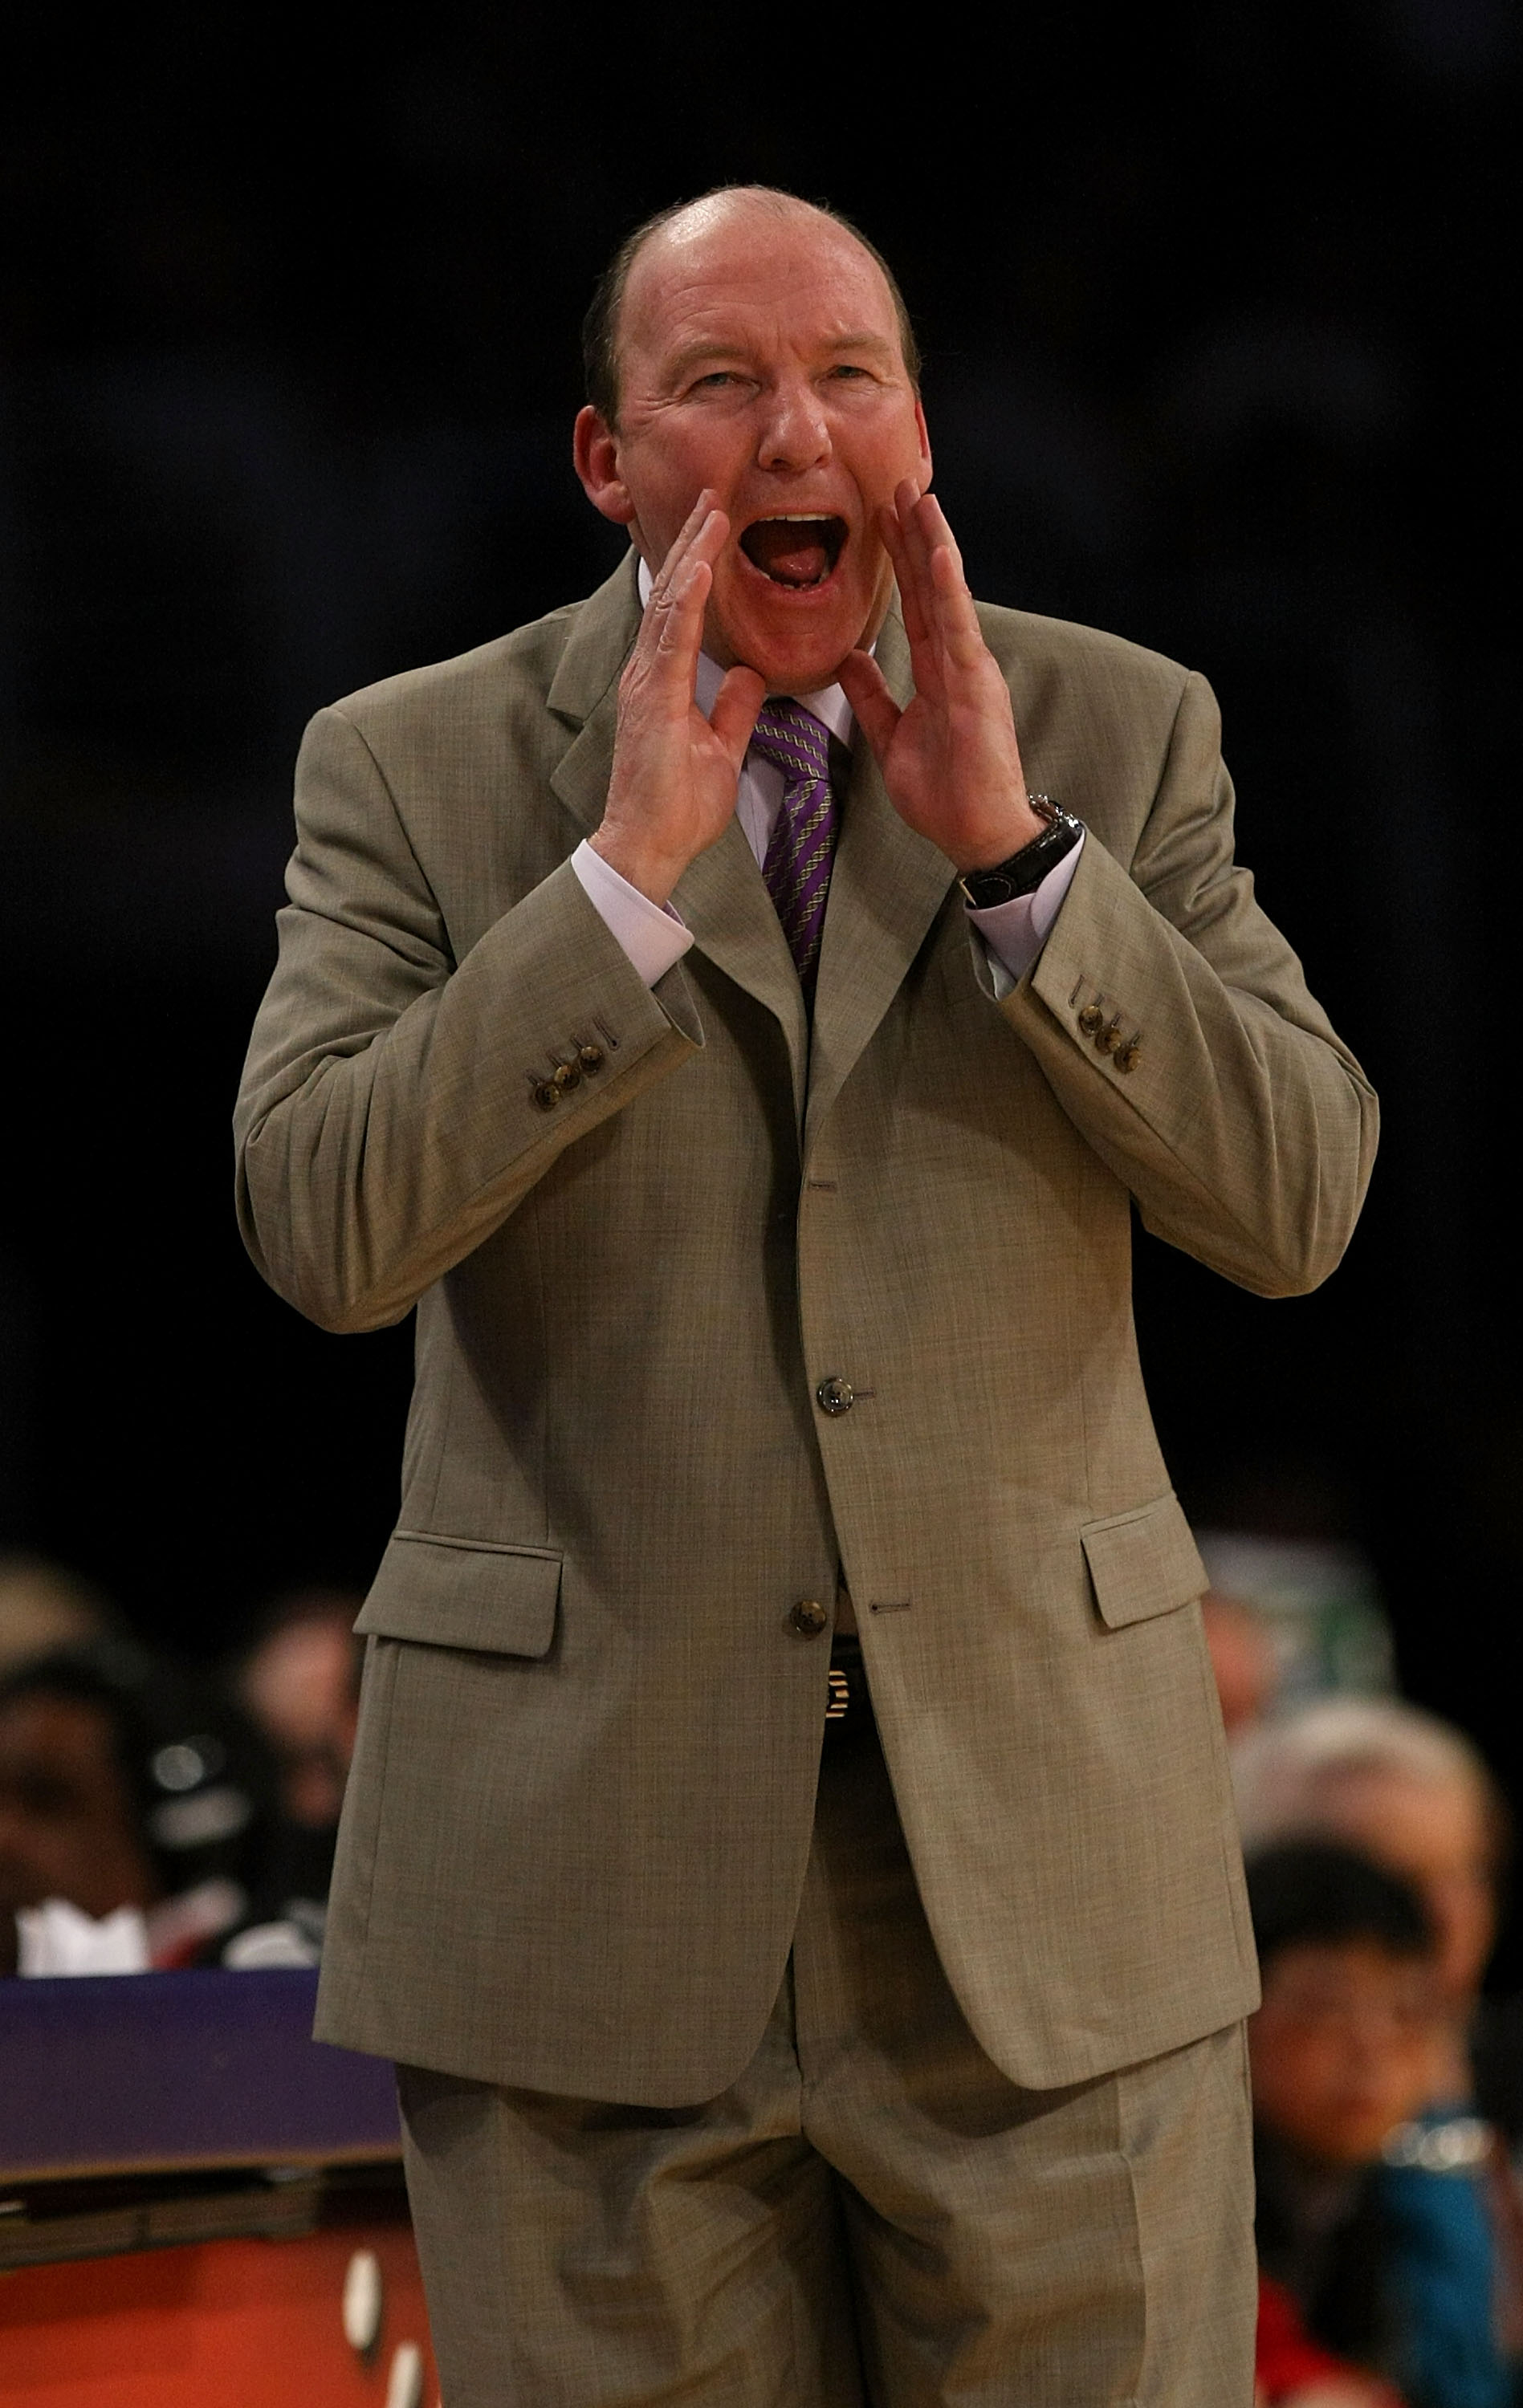 LOS ANGELES, CA - JANUARY 15:  Head coach Mike Dunleavy of the Los Angeles Clippers calls out during the game against the Los Angeles Lakers on January 15, 2010 at Staples Center in Los Angeles, California. The Lakers won 126-86. NOTE TO USER: User expres